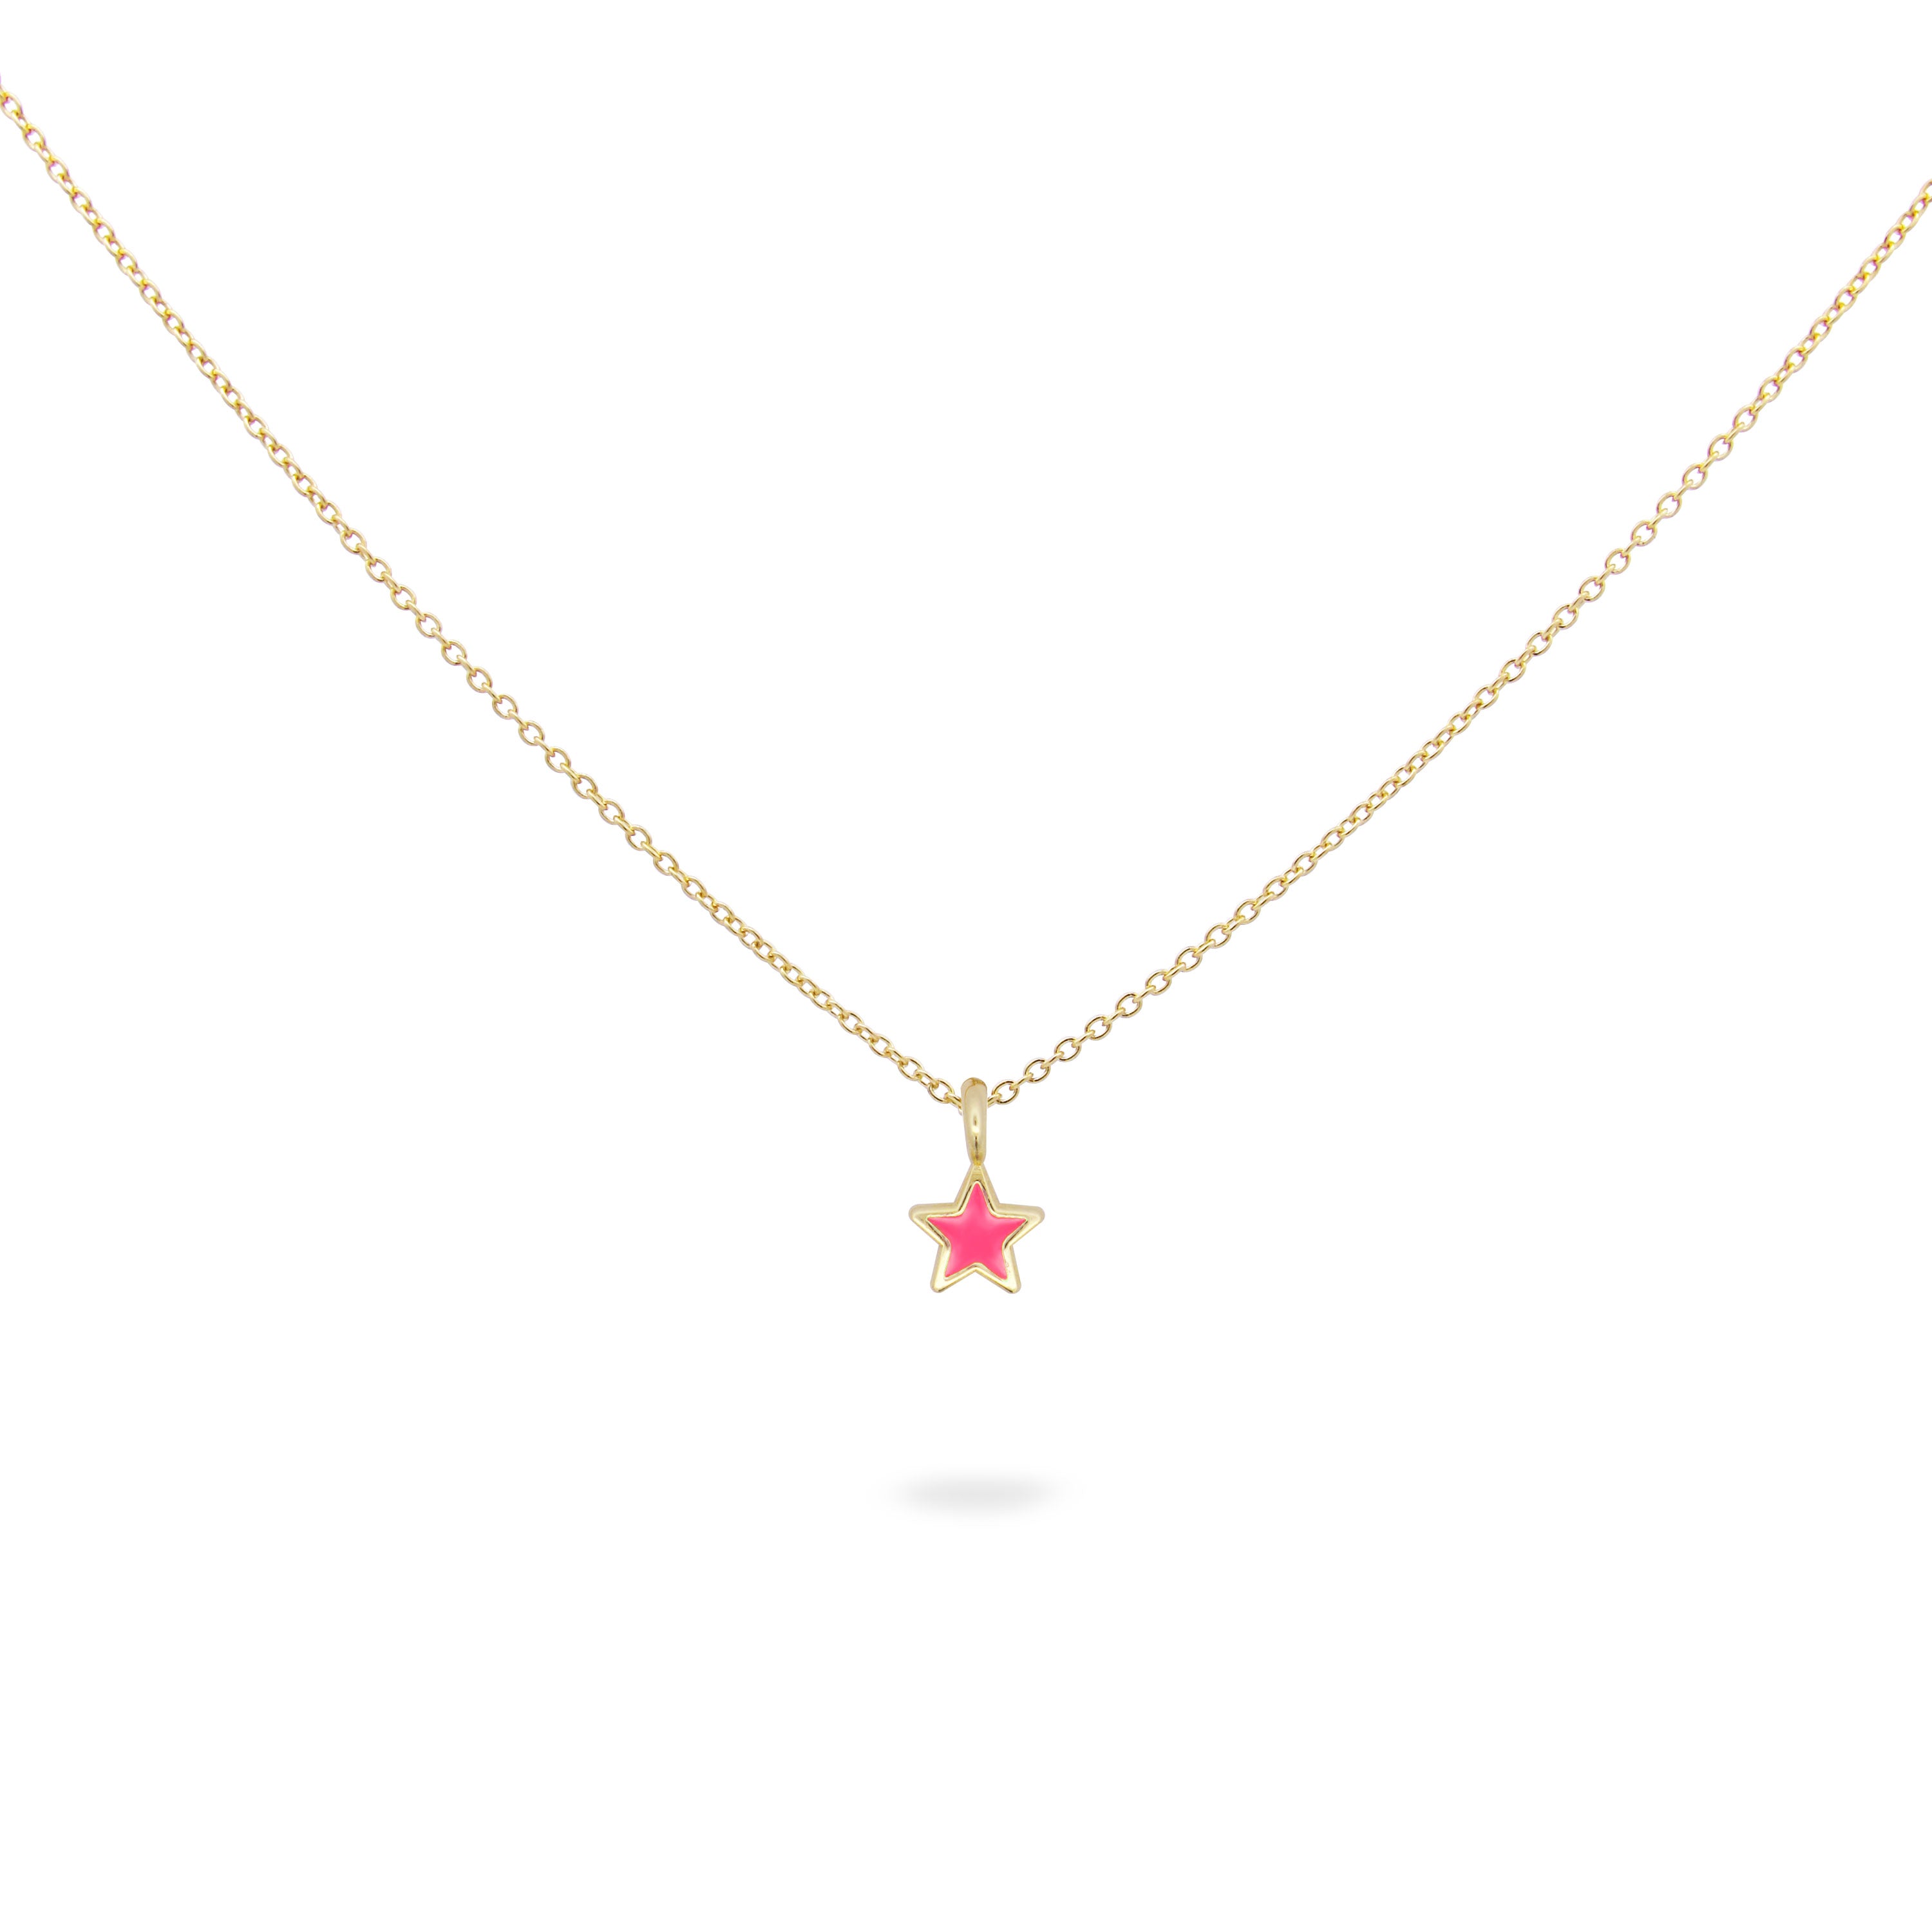 Necklace with enameled star - ColorFUN